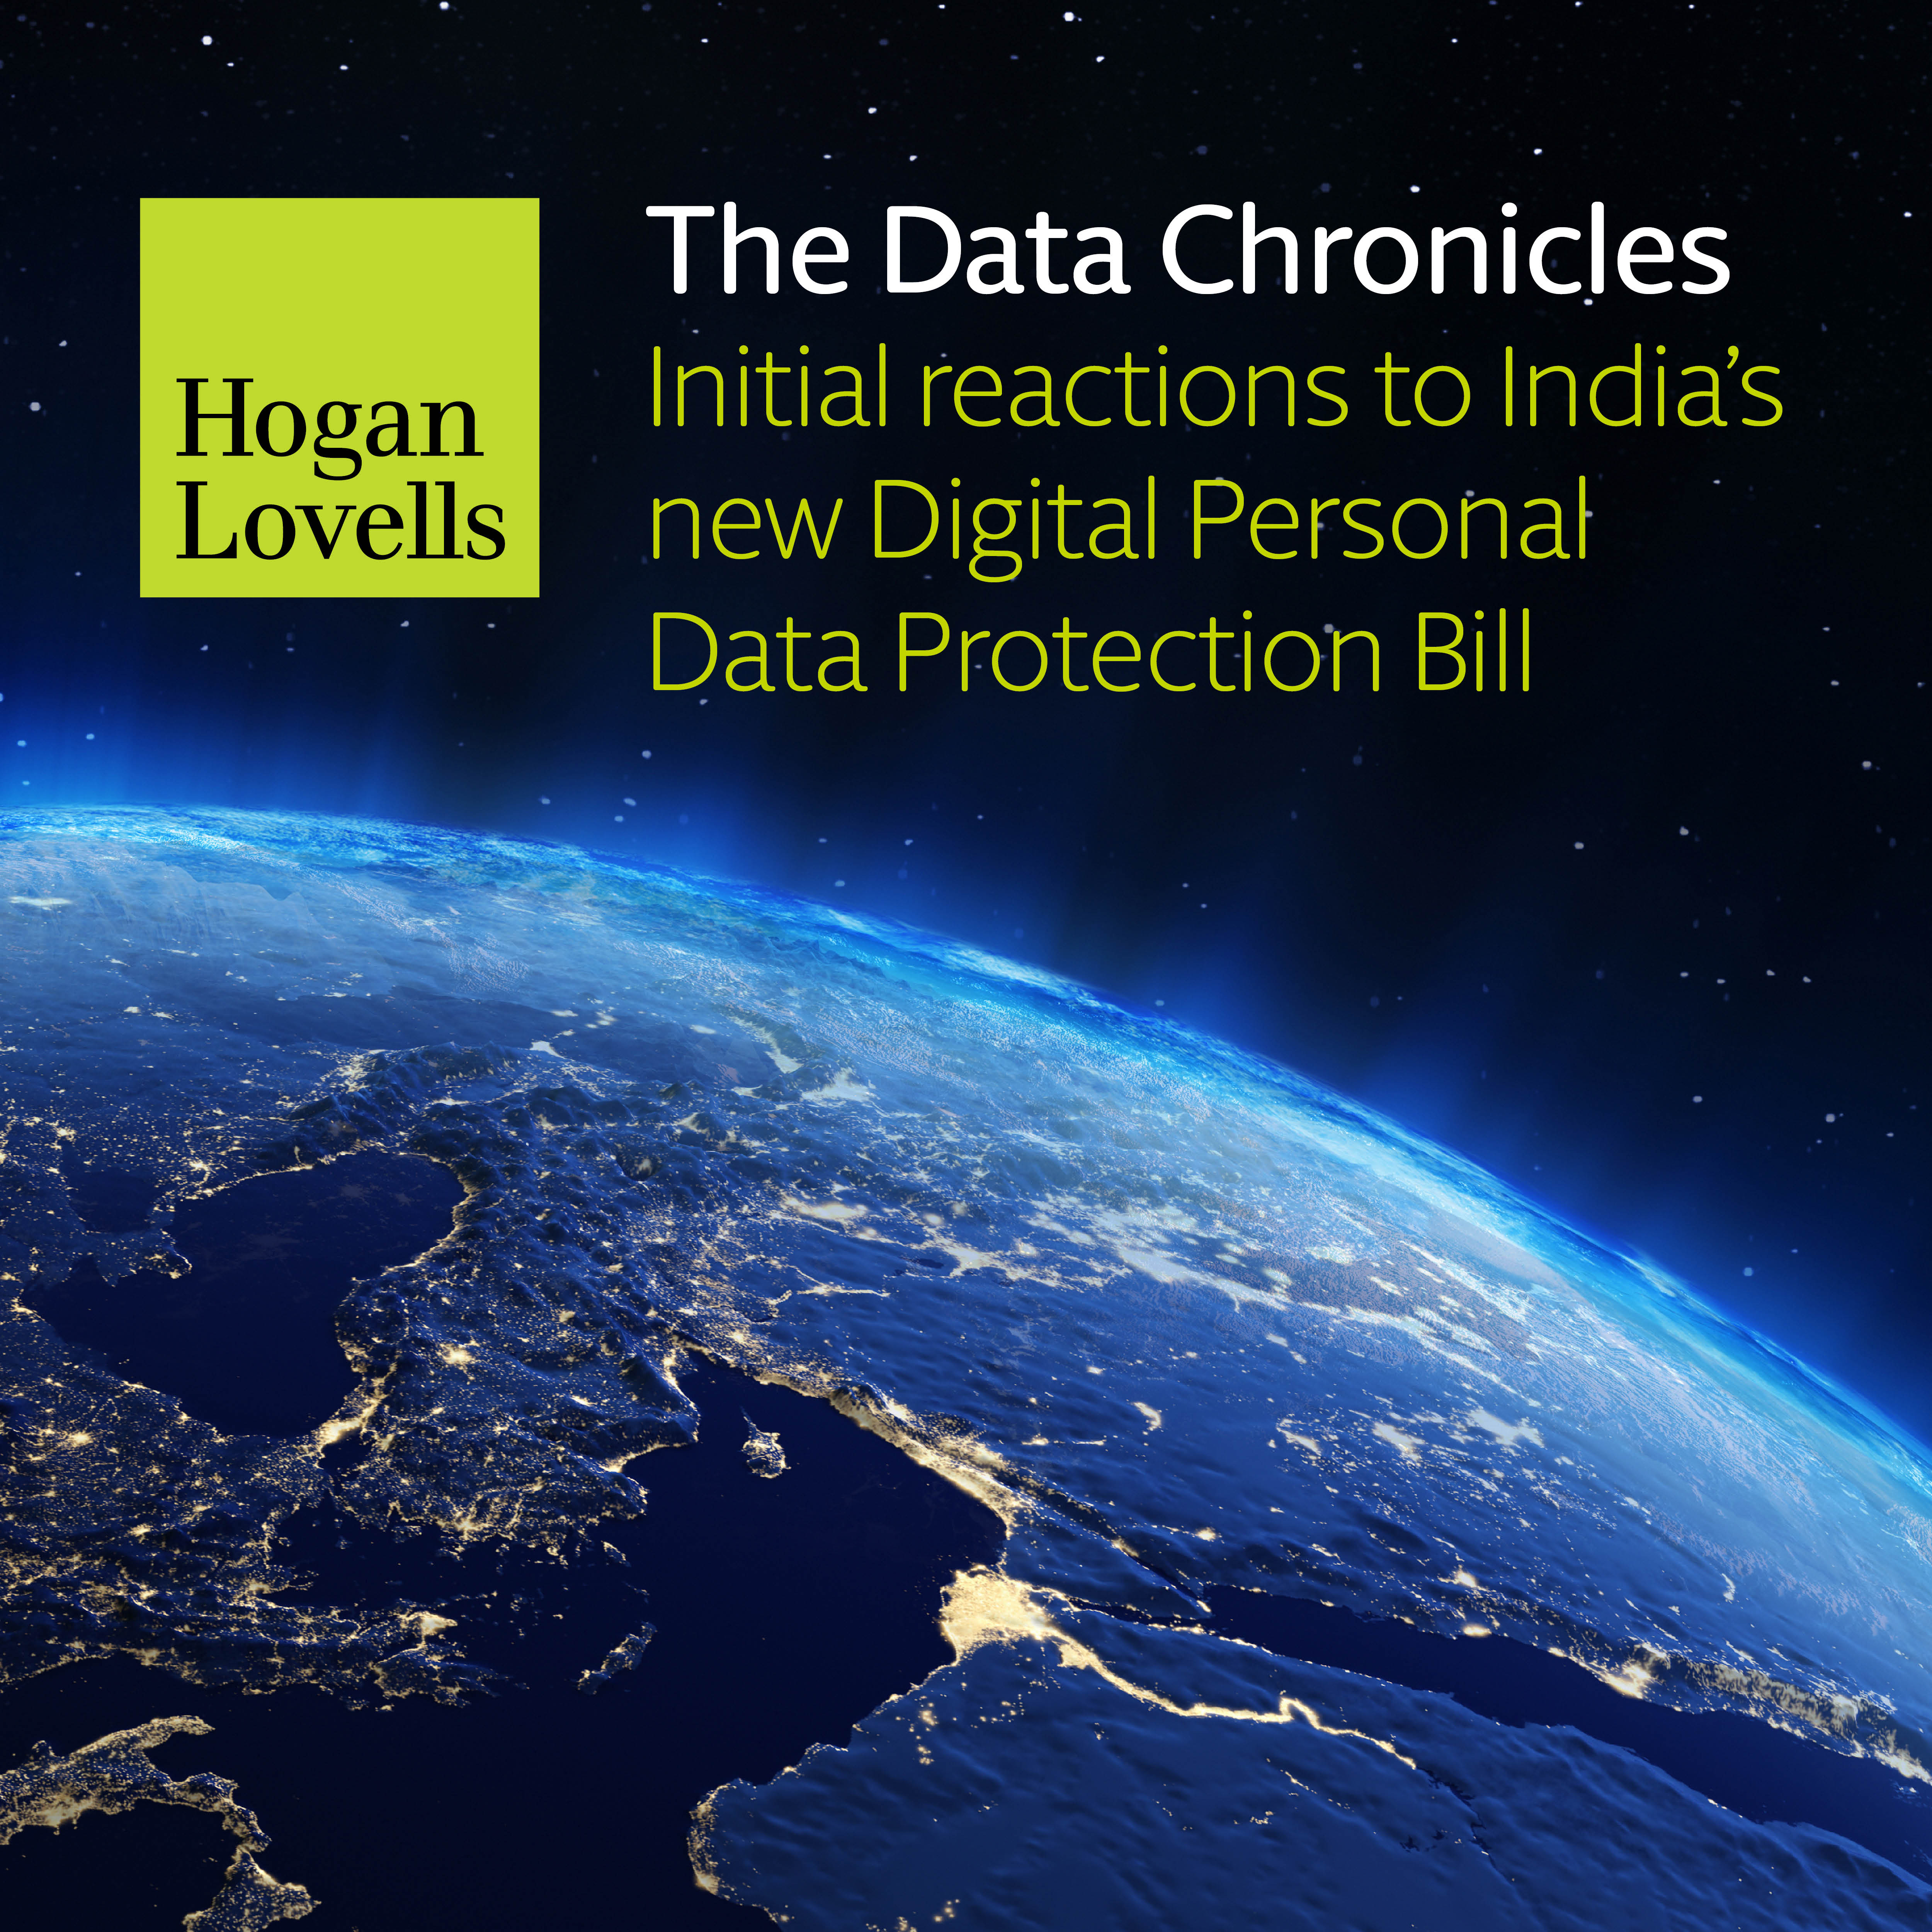 The Data Chronicles_Initial reactions to India's new DPDPB